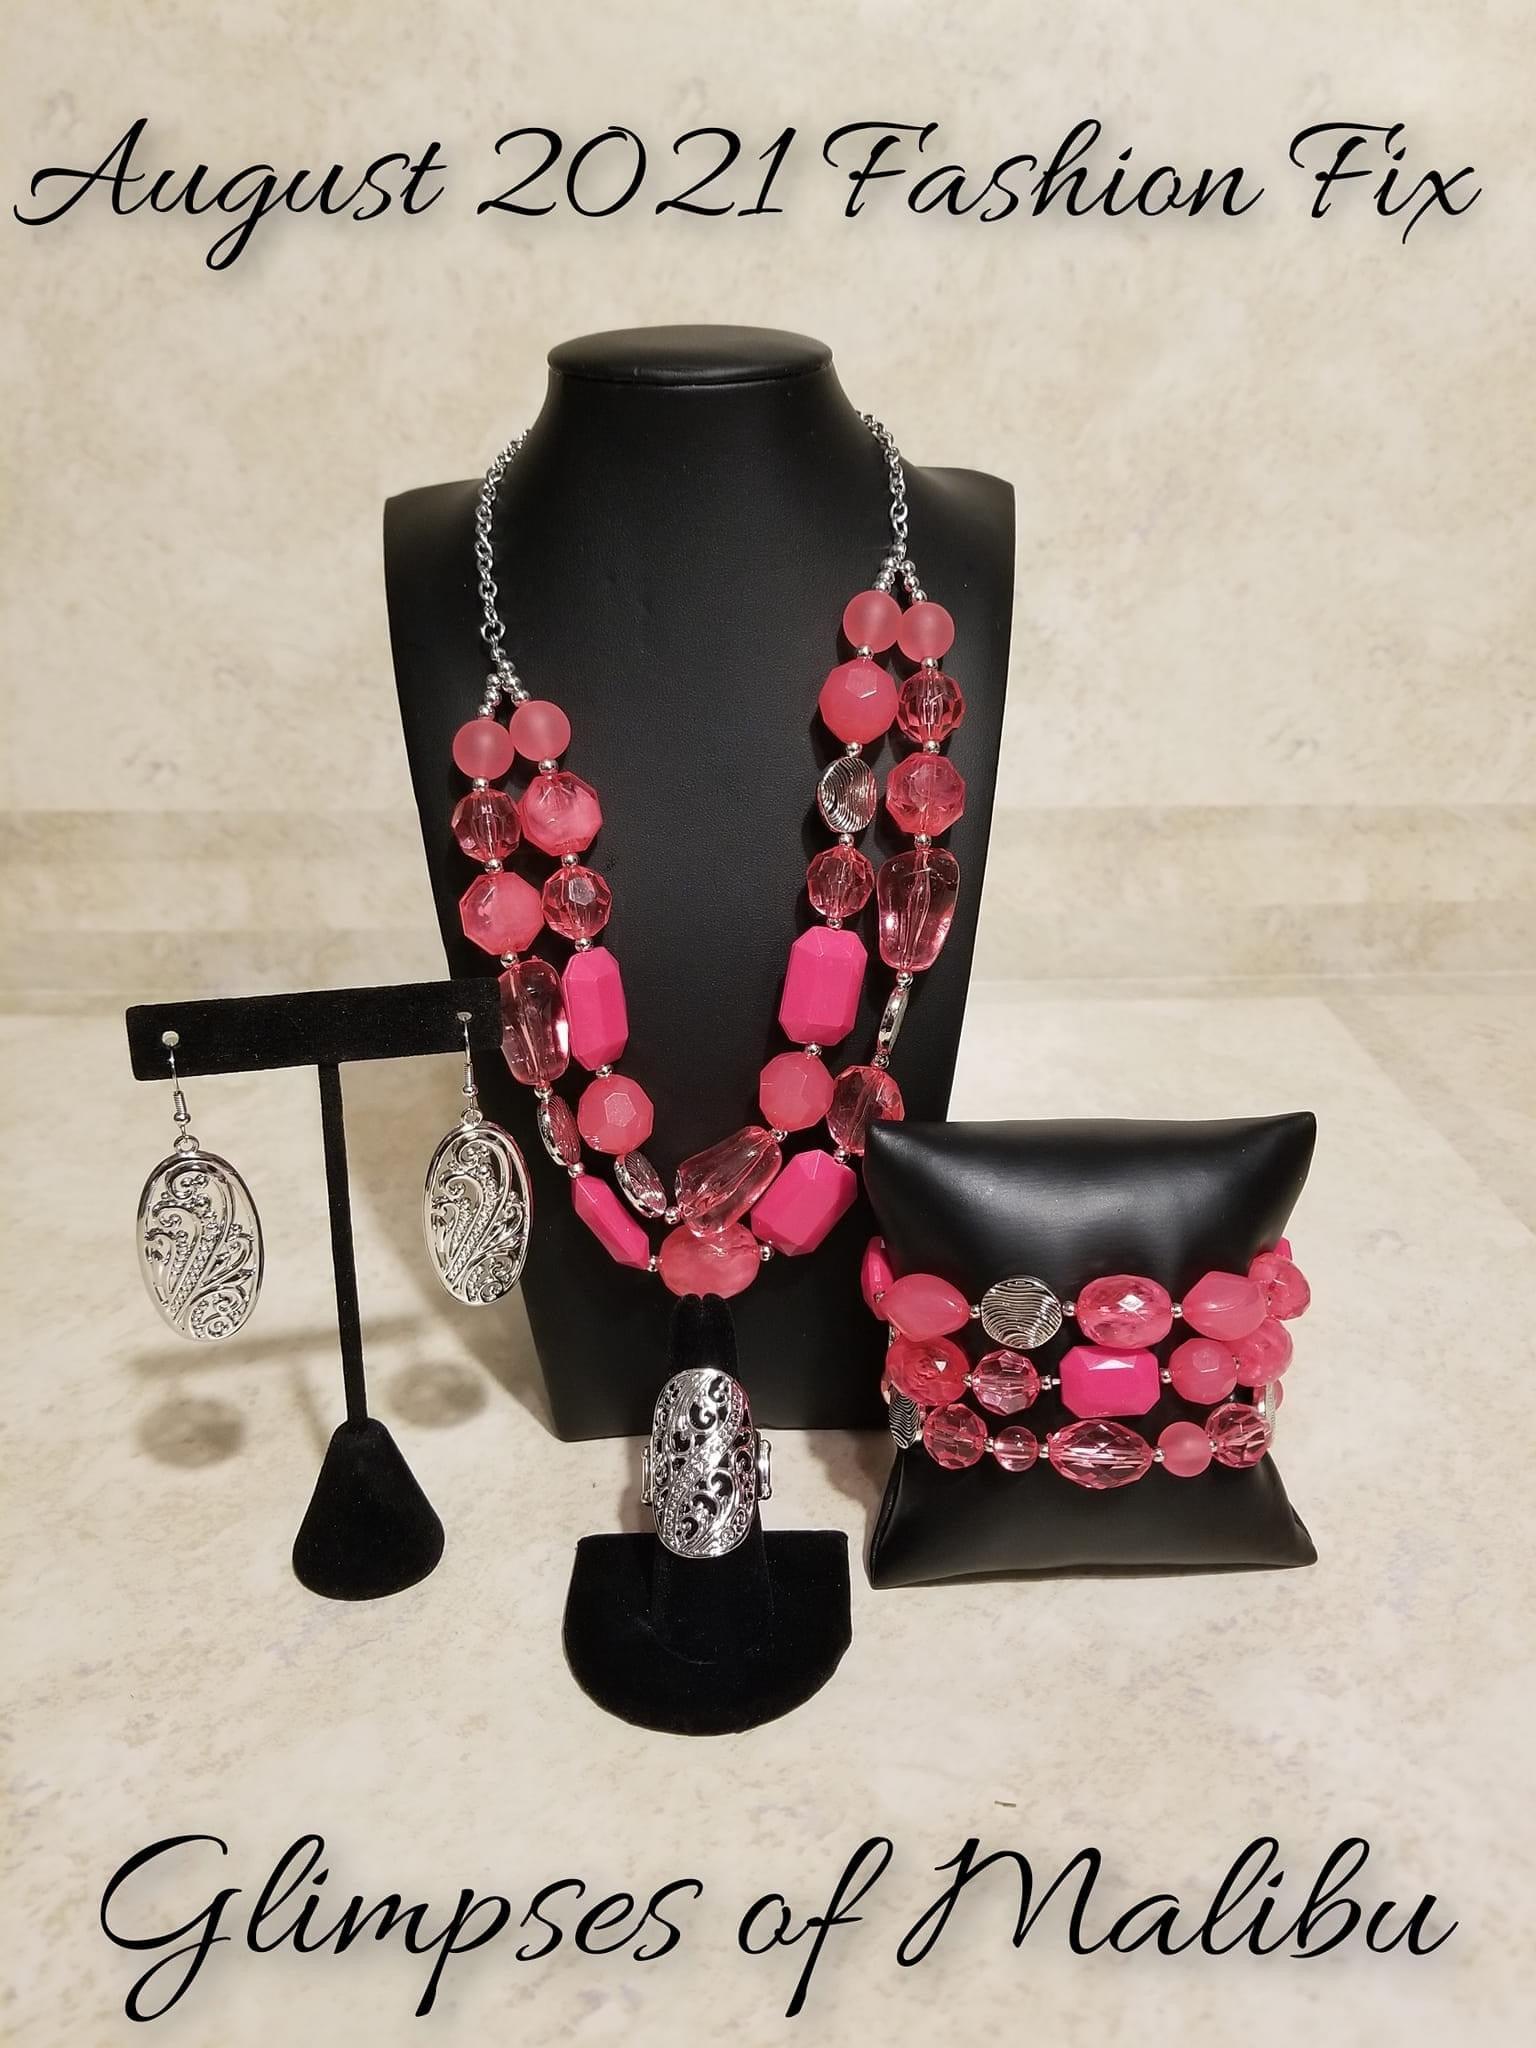 Paparazzi Accessories Glimpses of Malibu: FF August 2021 The Glimpses of Malibu collection was created with inspiration from the styles of Malibu, CA. Styles in this Trend Blend will feature fun, livable fashion with an upscale flavor. The color are usual